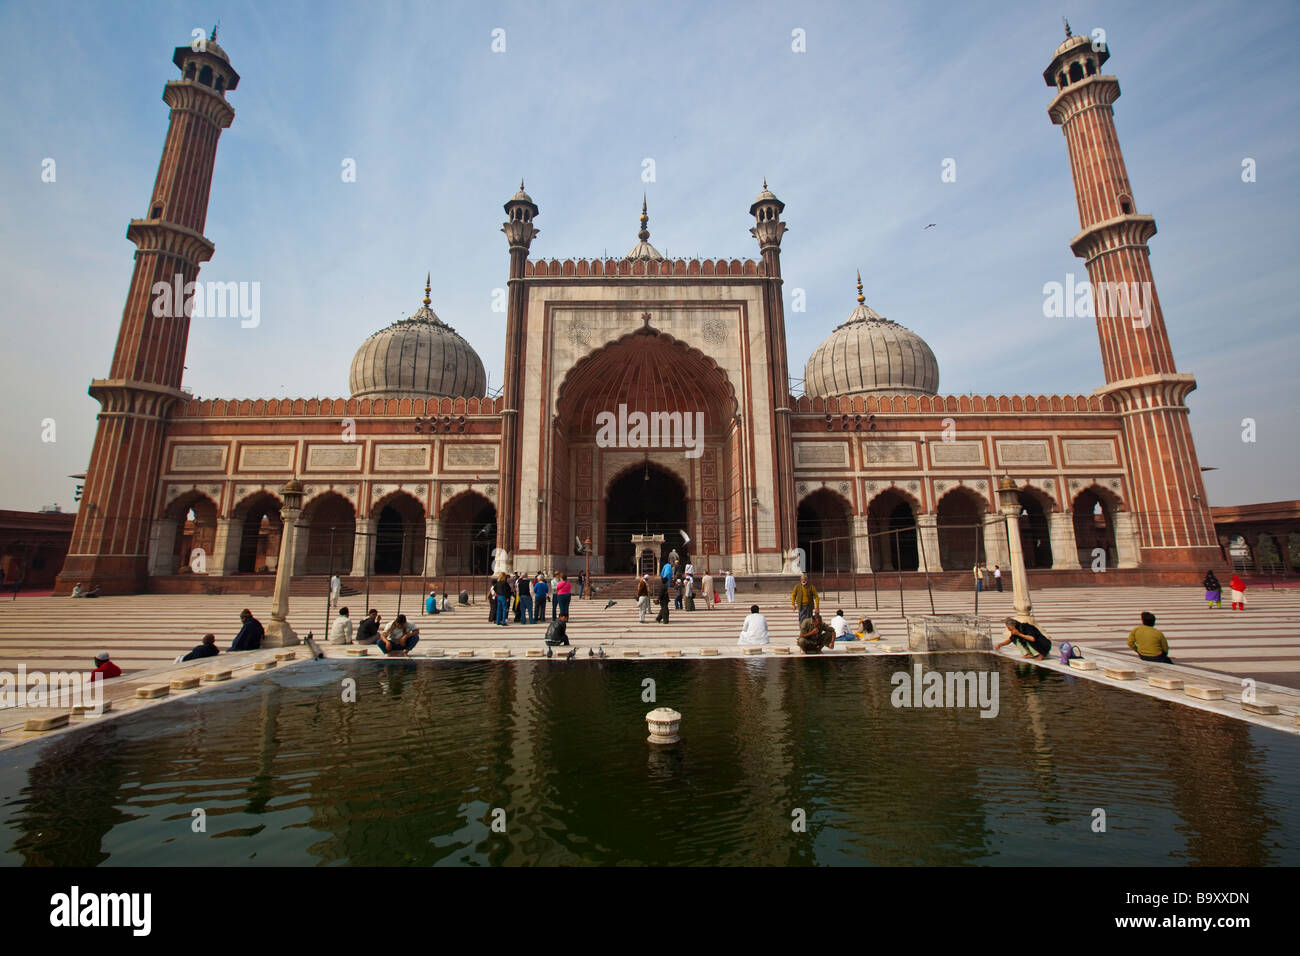 Friday Mosque or Jama Masjid in Old Delhi India Stock Photo